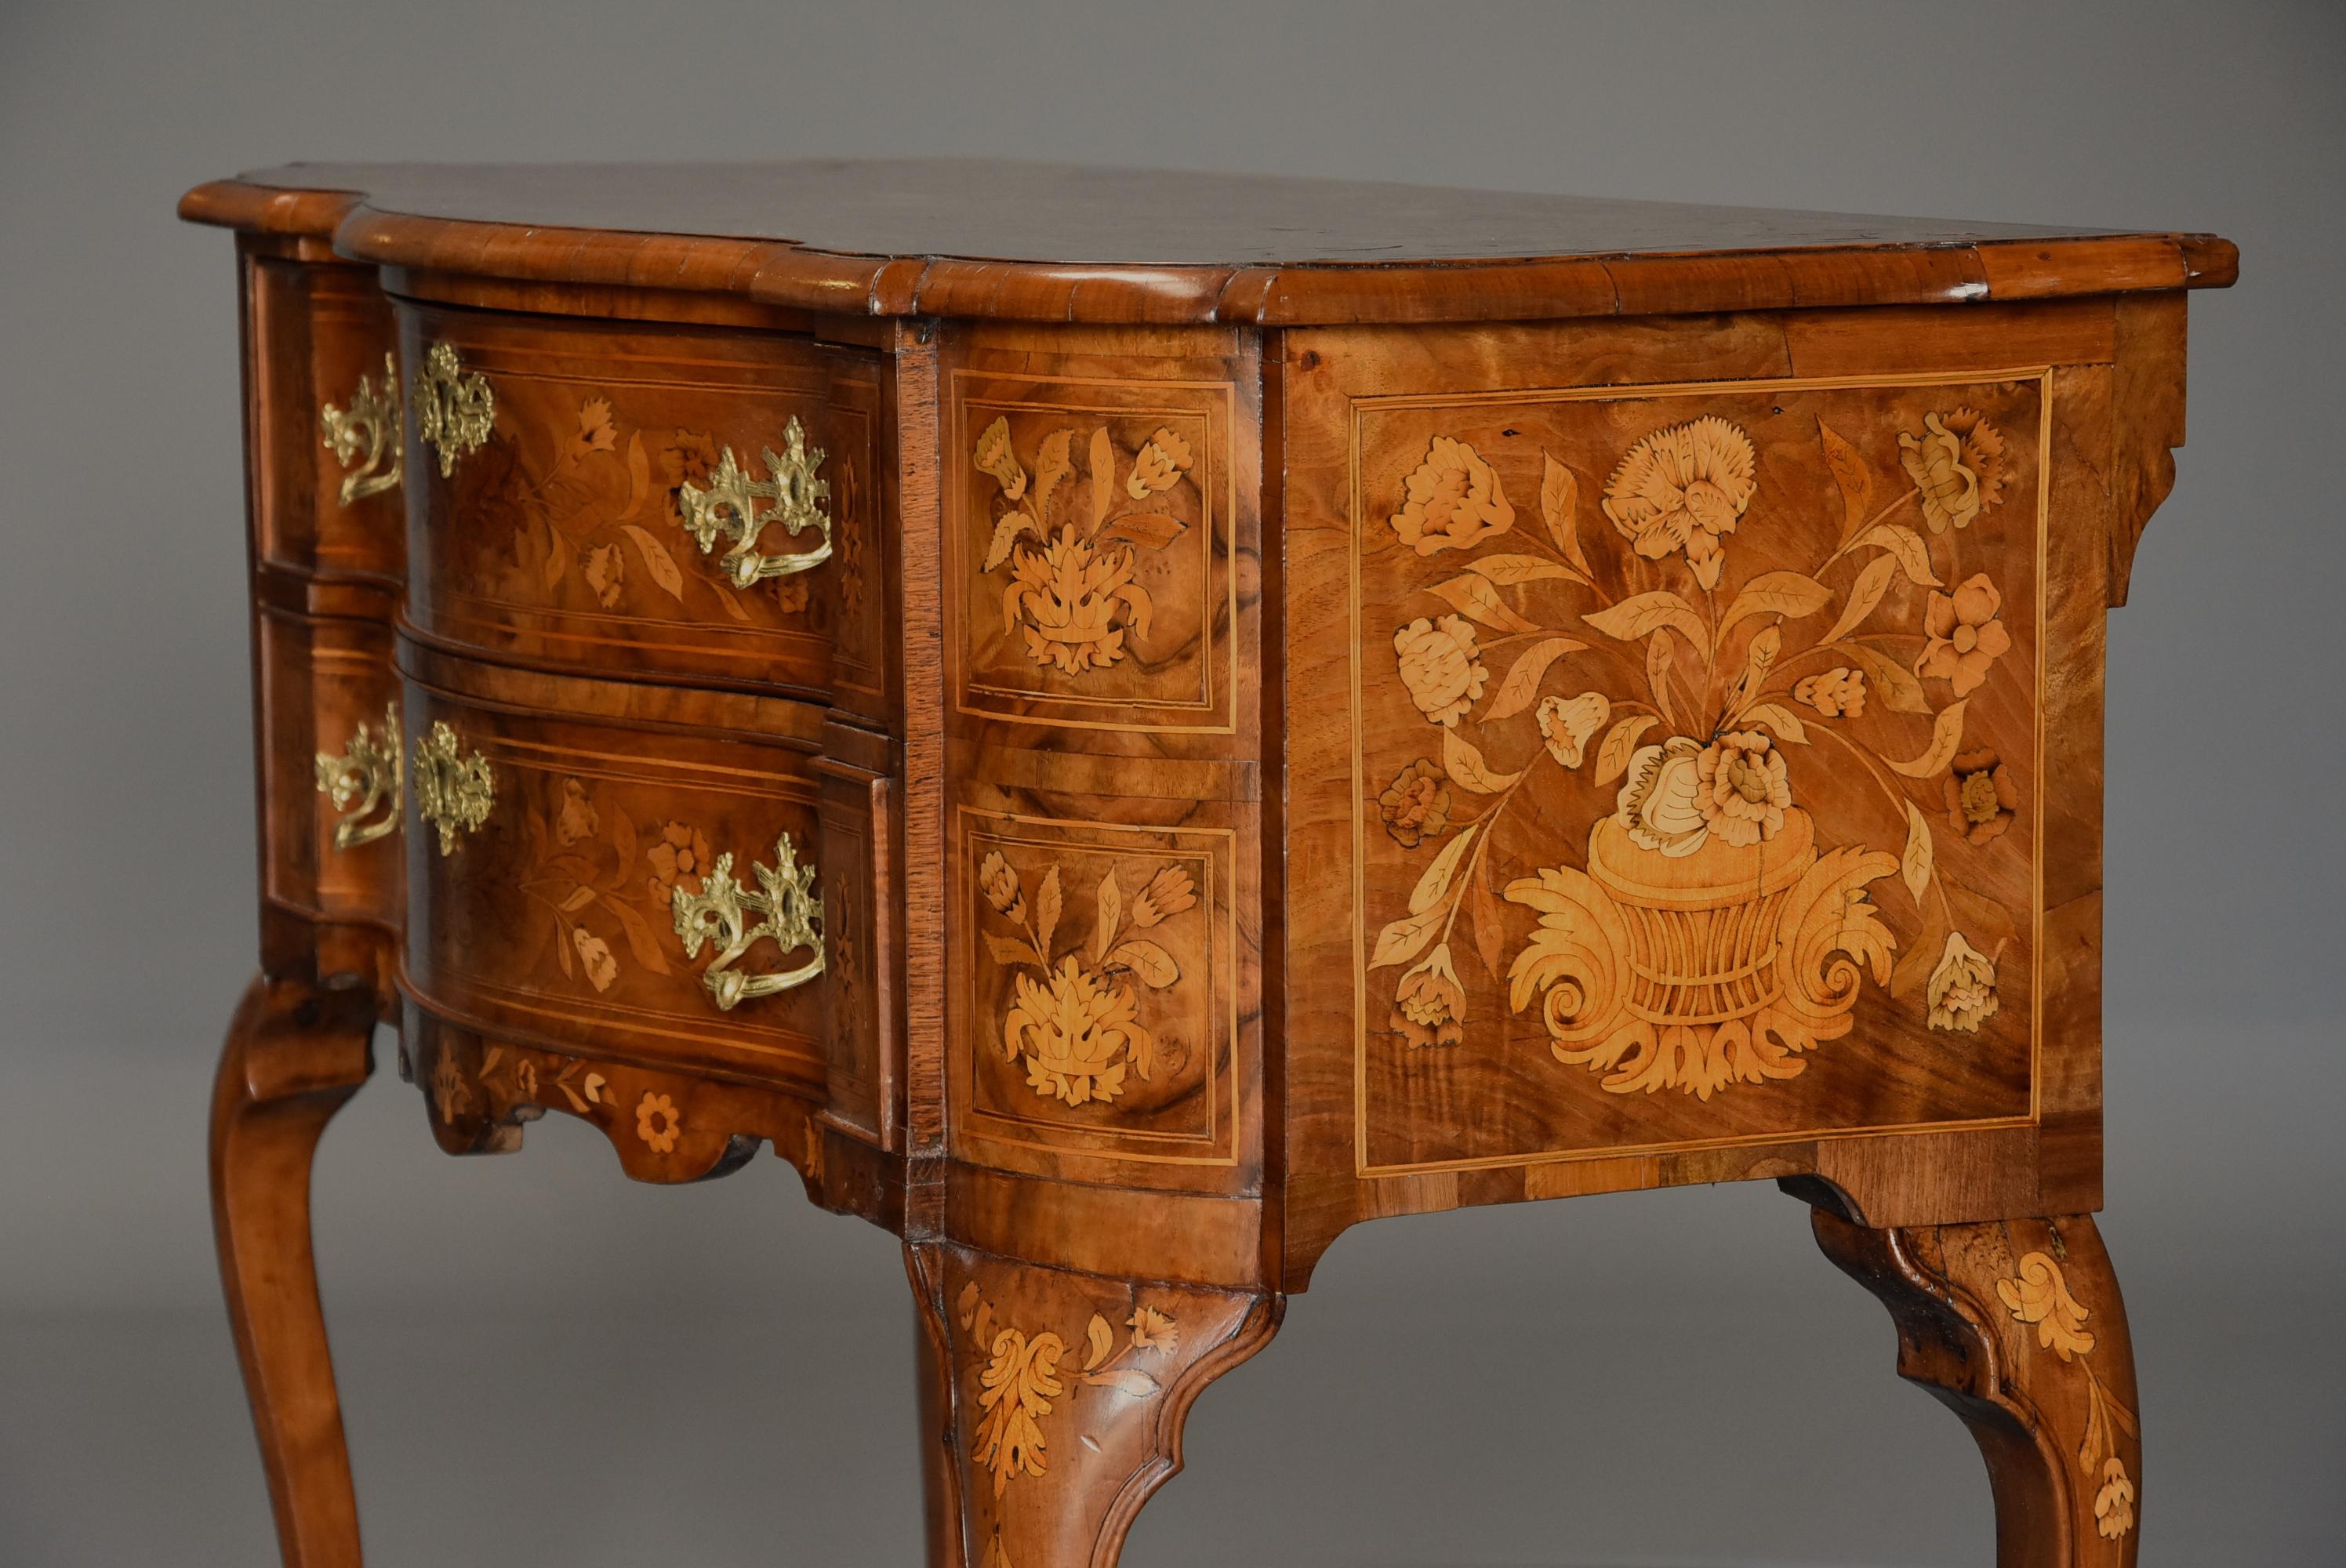 Fine Quality Mid-19th Century Floral Marquetry Walnut Lowboy of Serpentine Form For Sale 4